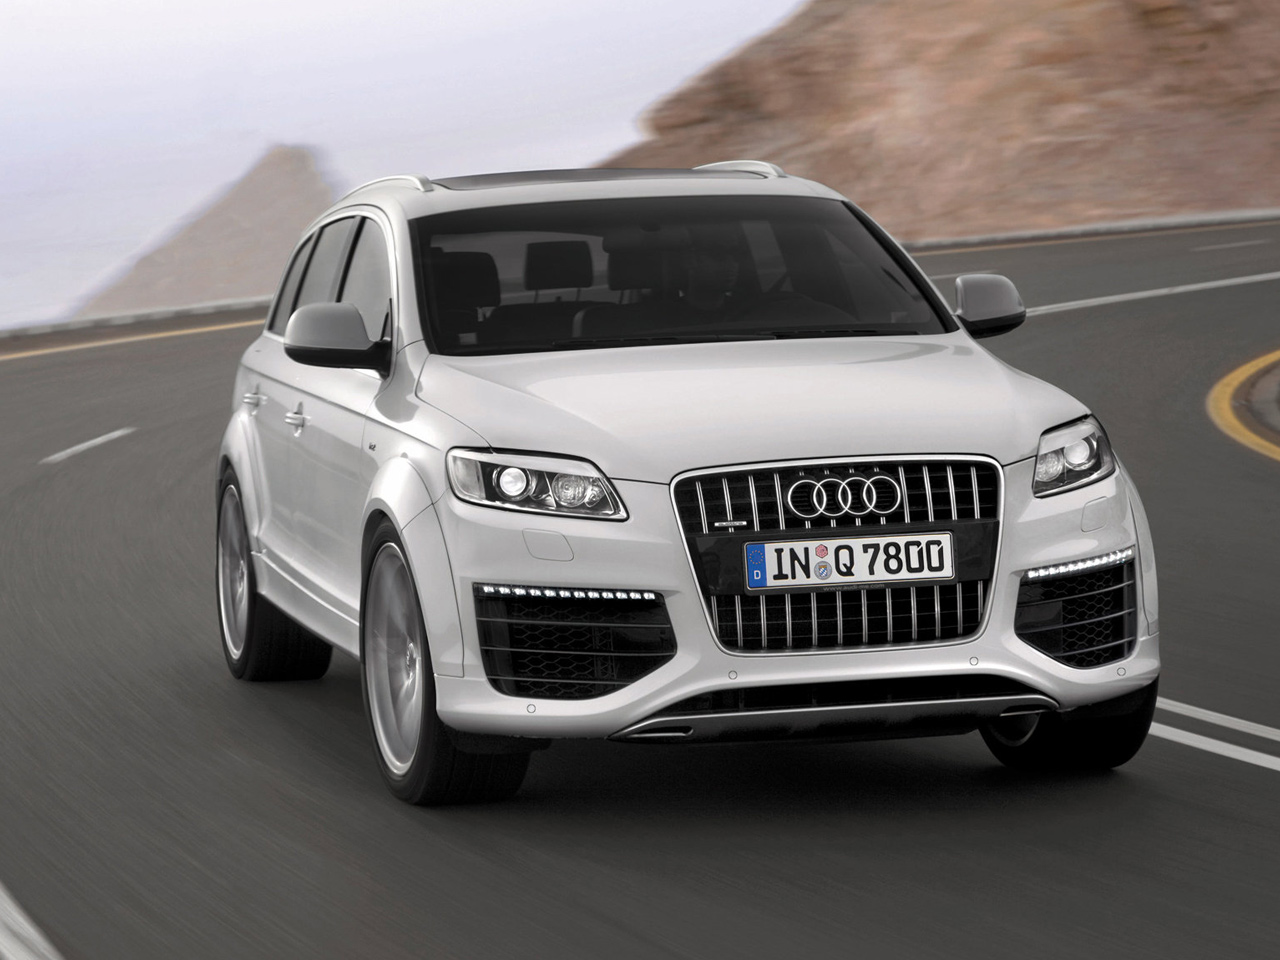 Gorgeous Audi Q7 Wallpaper Full HD Pictures